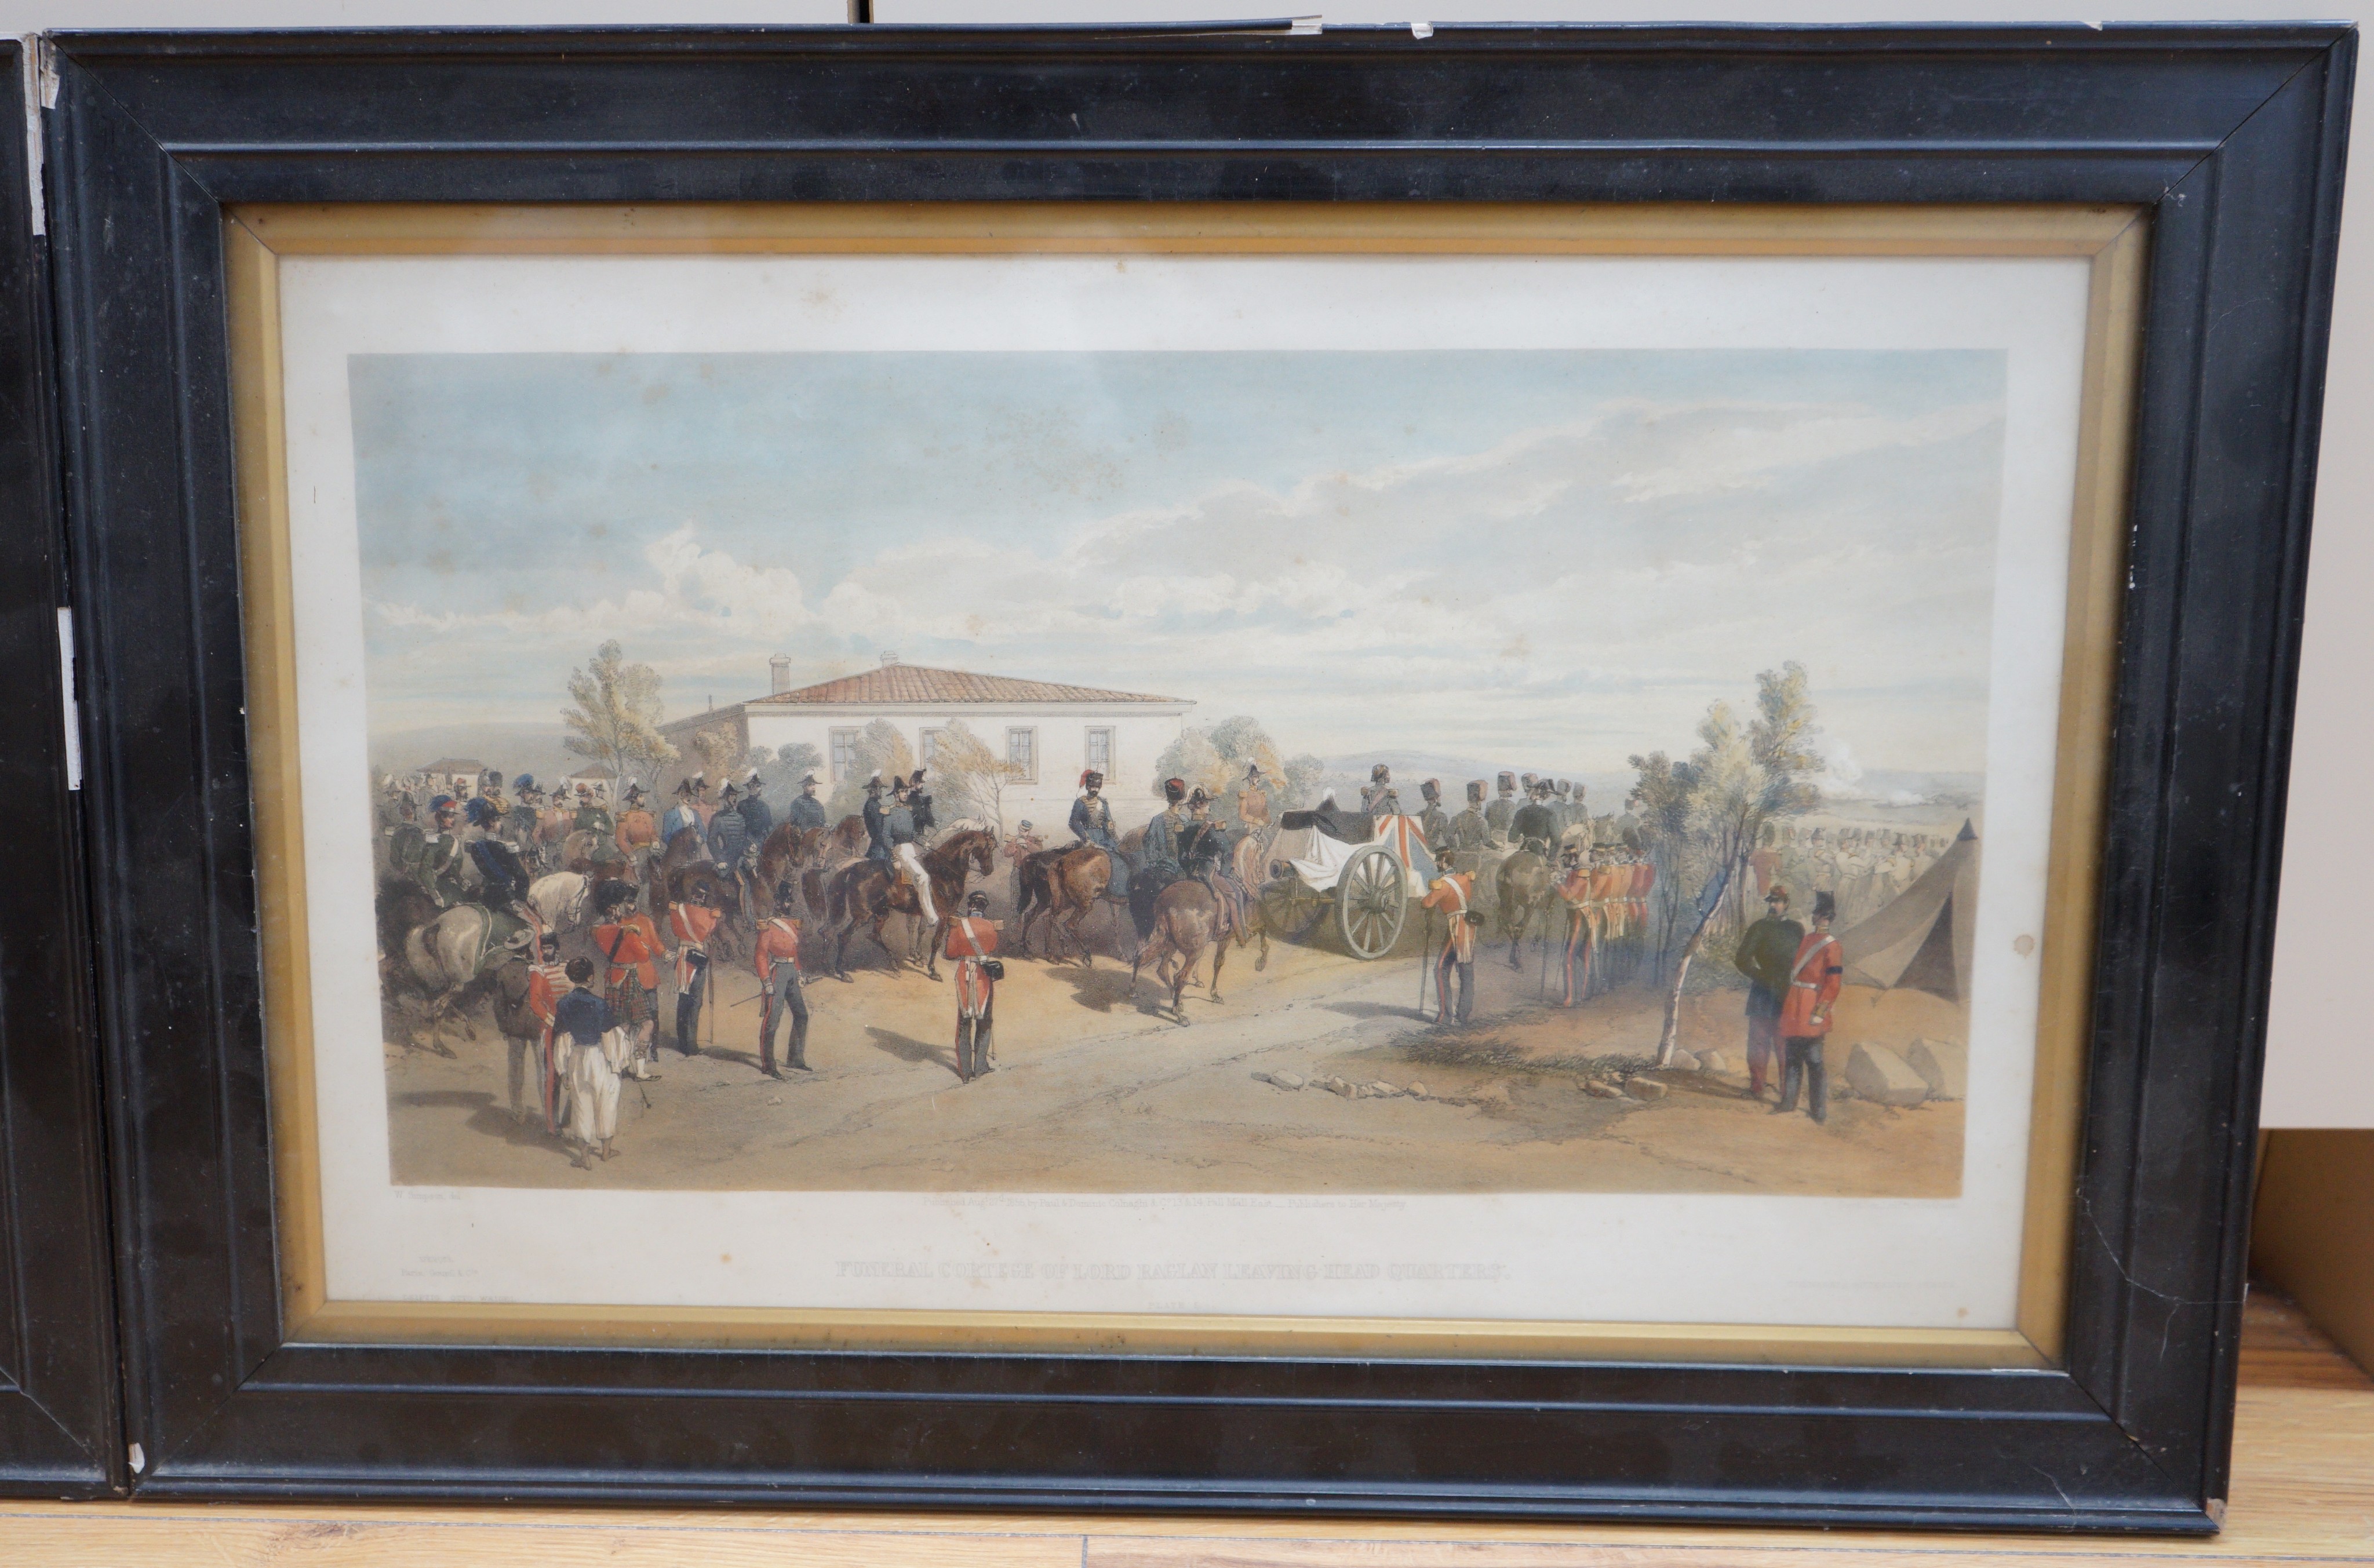 Bryson after Simpson, two coloured lithographs, Scenes from the Crimea, 'Cavalry Camp' and 'Funeral Cortege of Lord Raglan leaving headquarters', 1855, 33 x 52cm